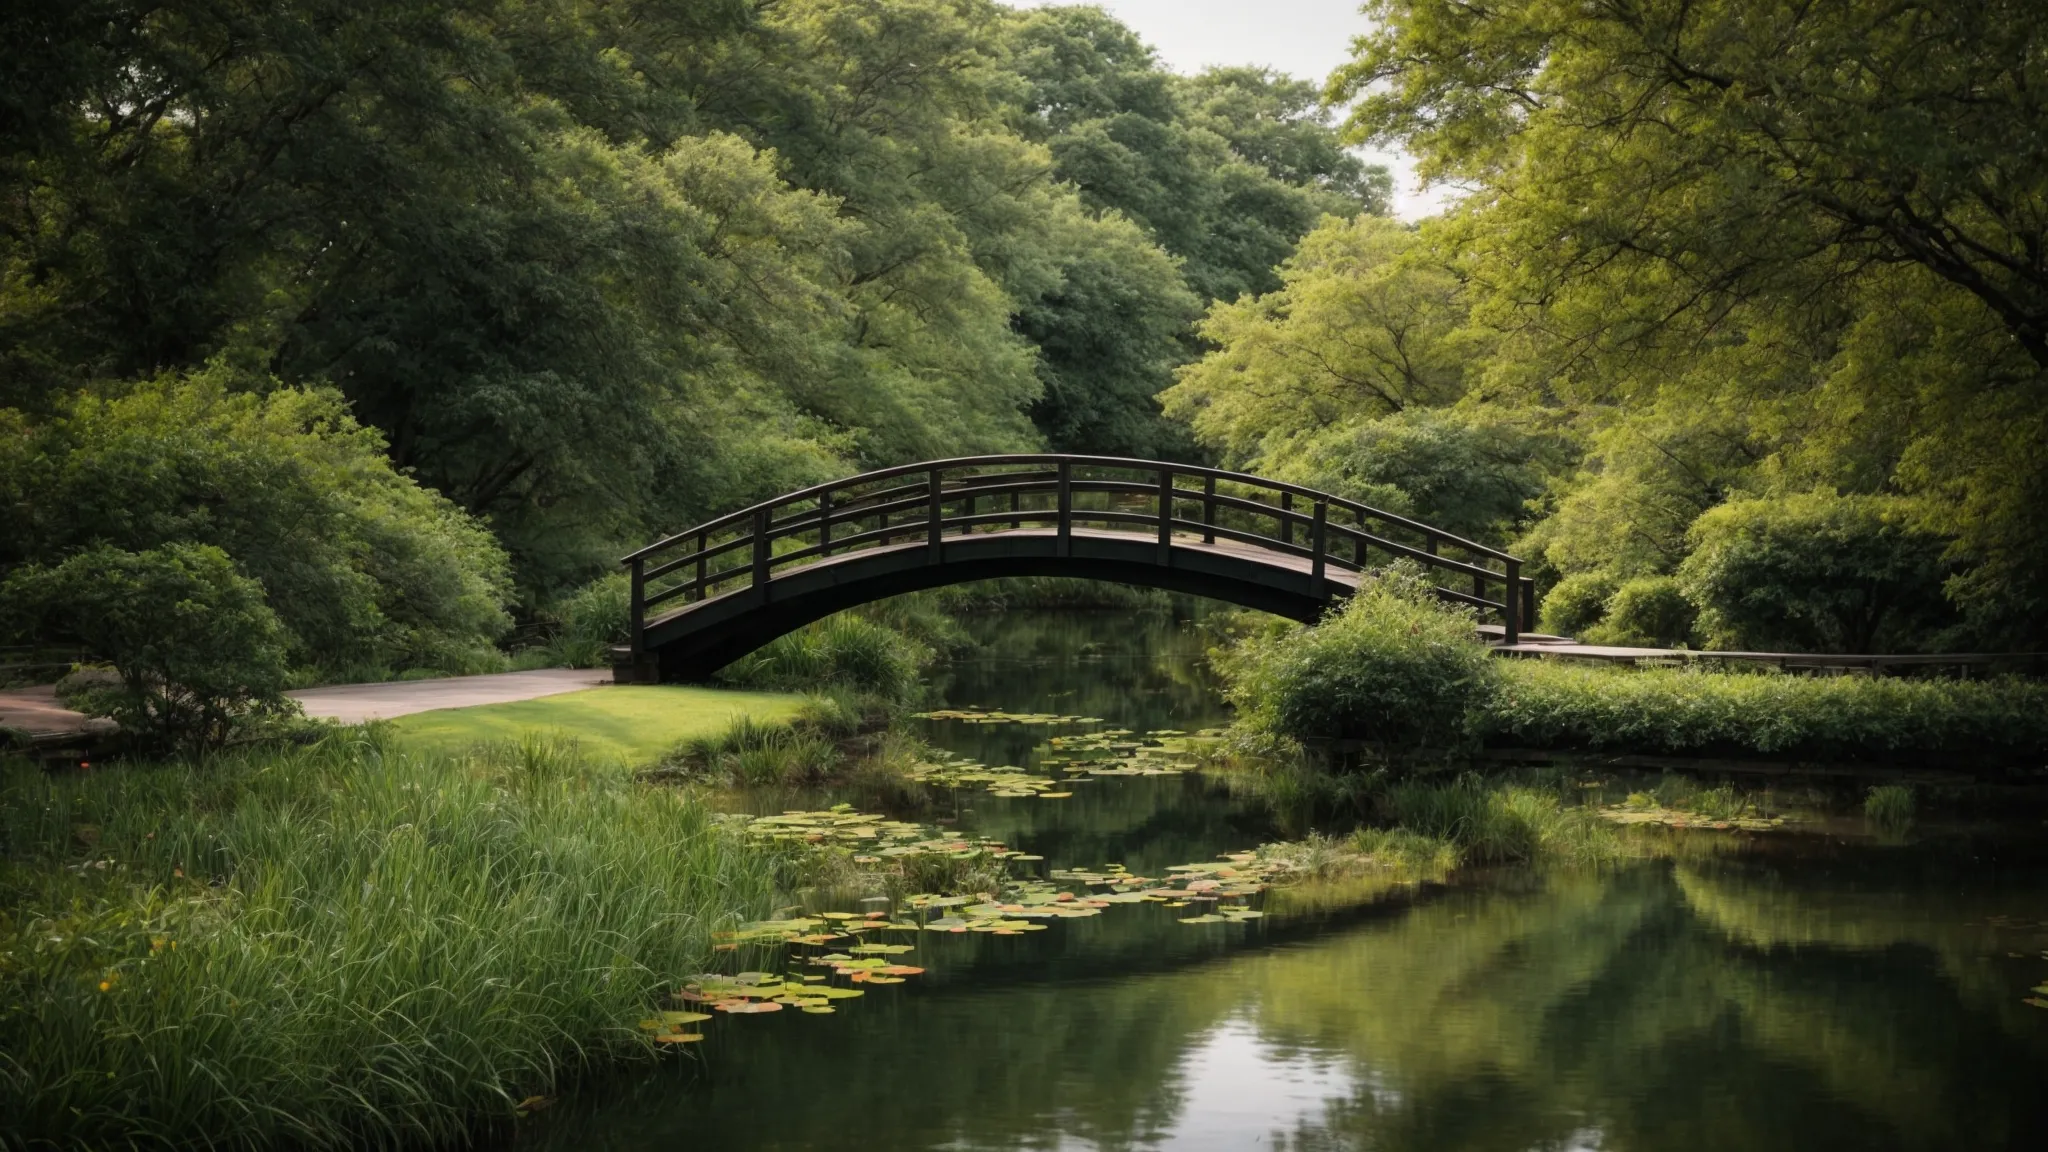 a footbridge meanders over a tranquil pond in a lush, secluded city park.